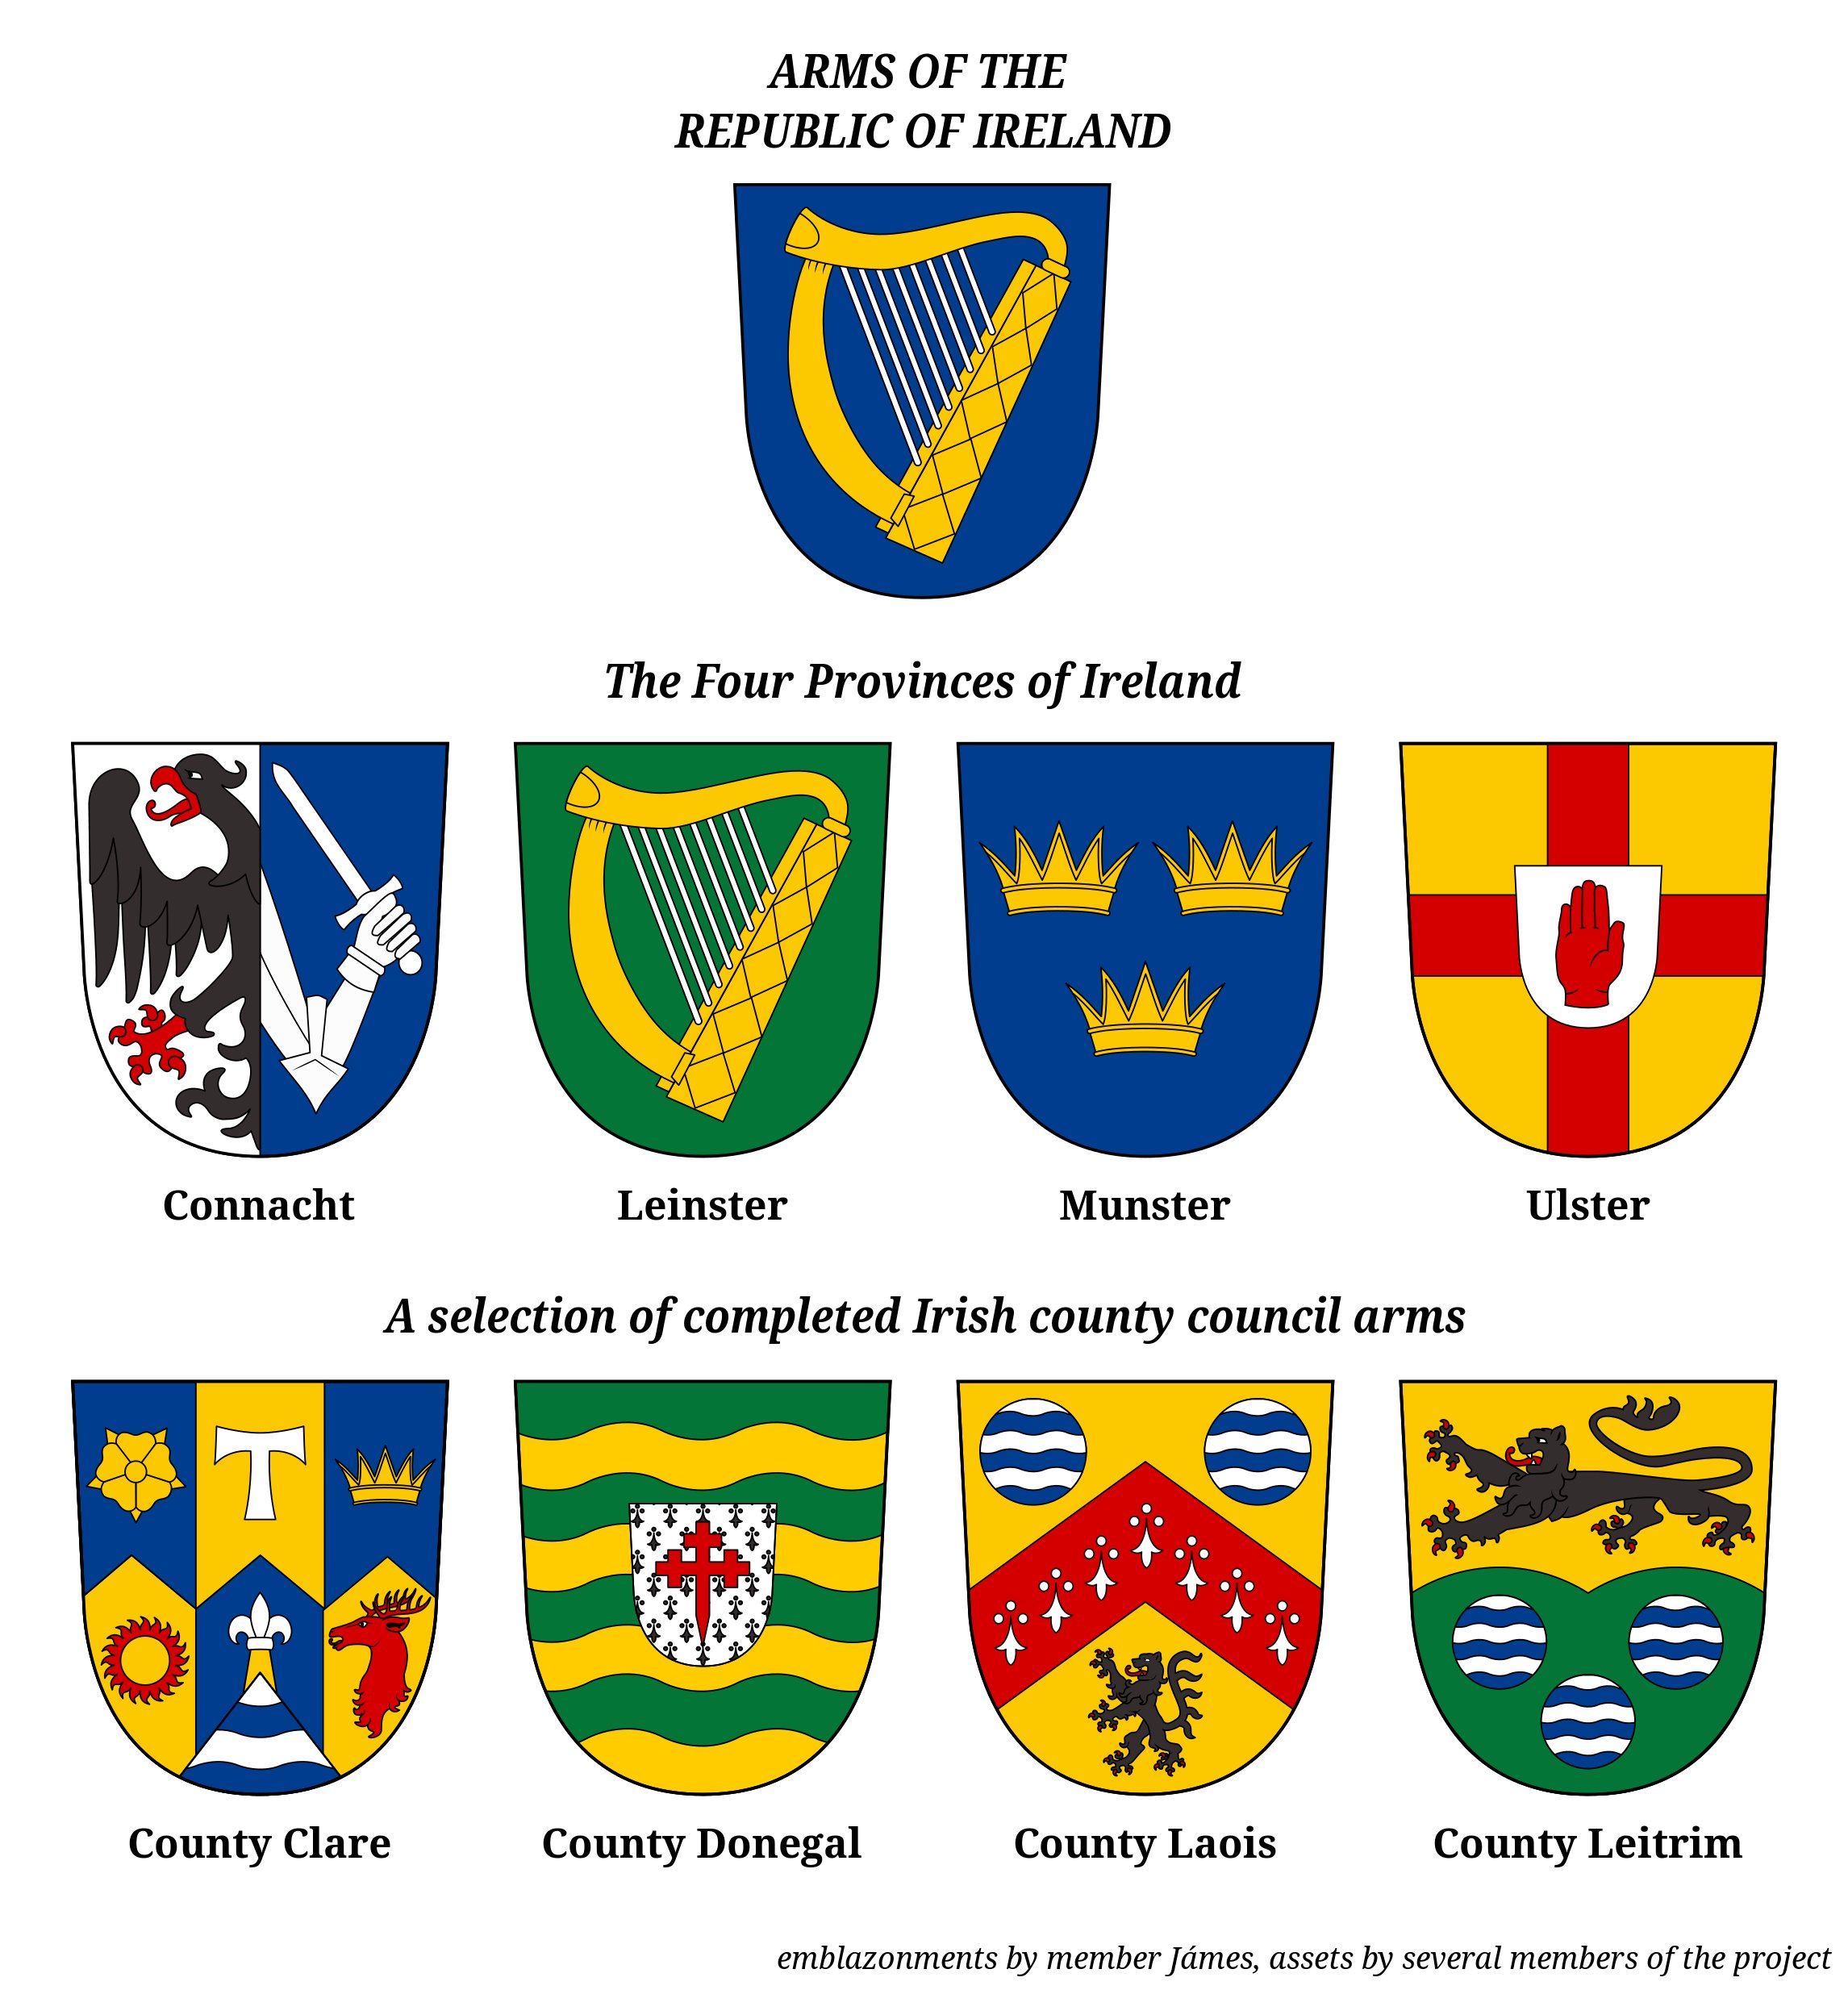 Encyclopaedia Heraldica–Internet Armorial Project on X: #heraldry #sweden  The Swedish three crowns (tre kronor) symbol was first used on the seal of  King Magnus Ladulås, who ruled between 1275 and 1290. The